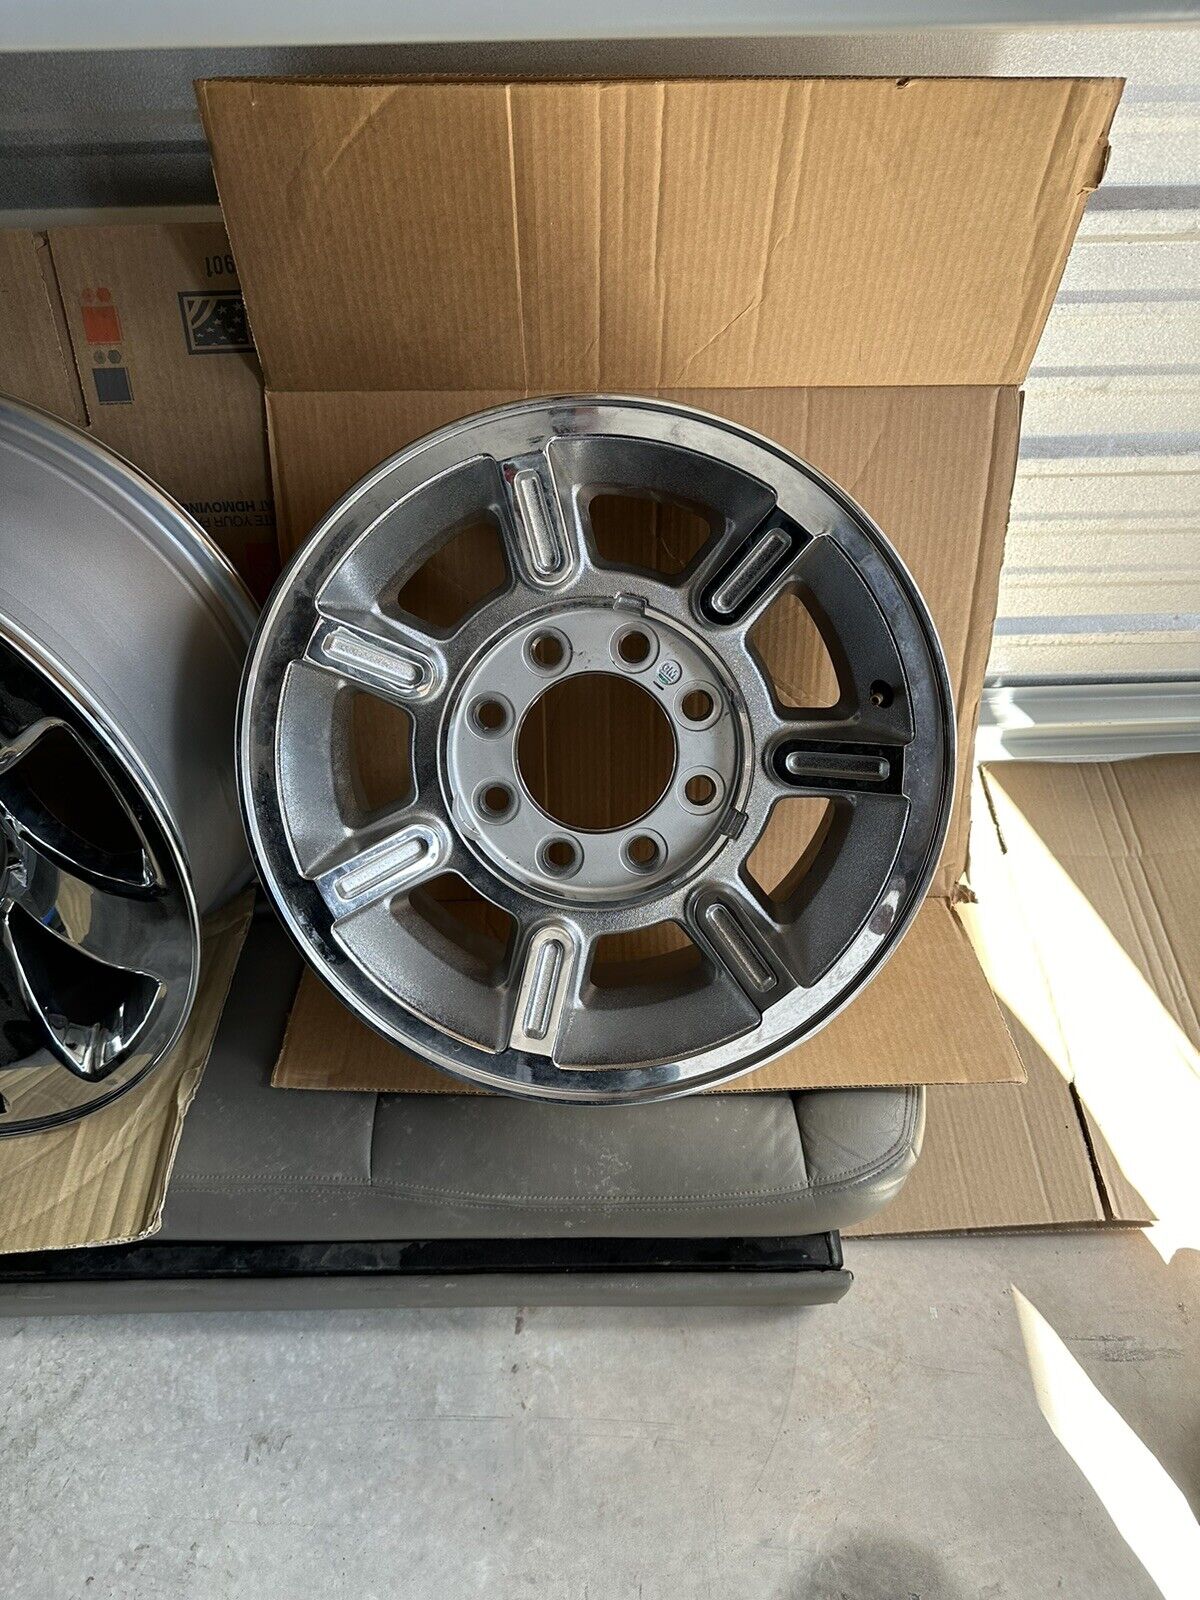 New 2008  H2 17” Chrome Rim Wheel From Spare